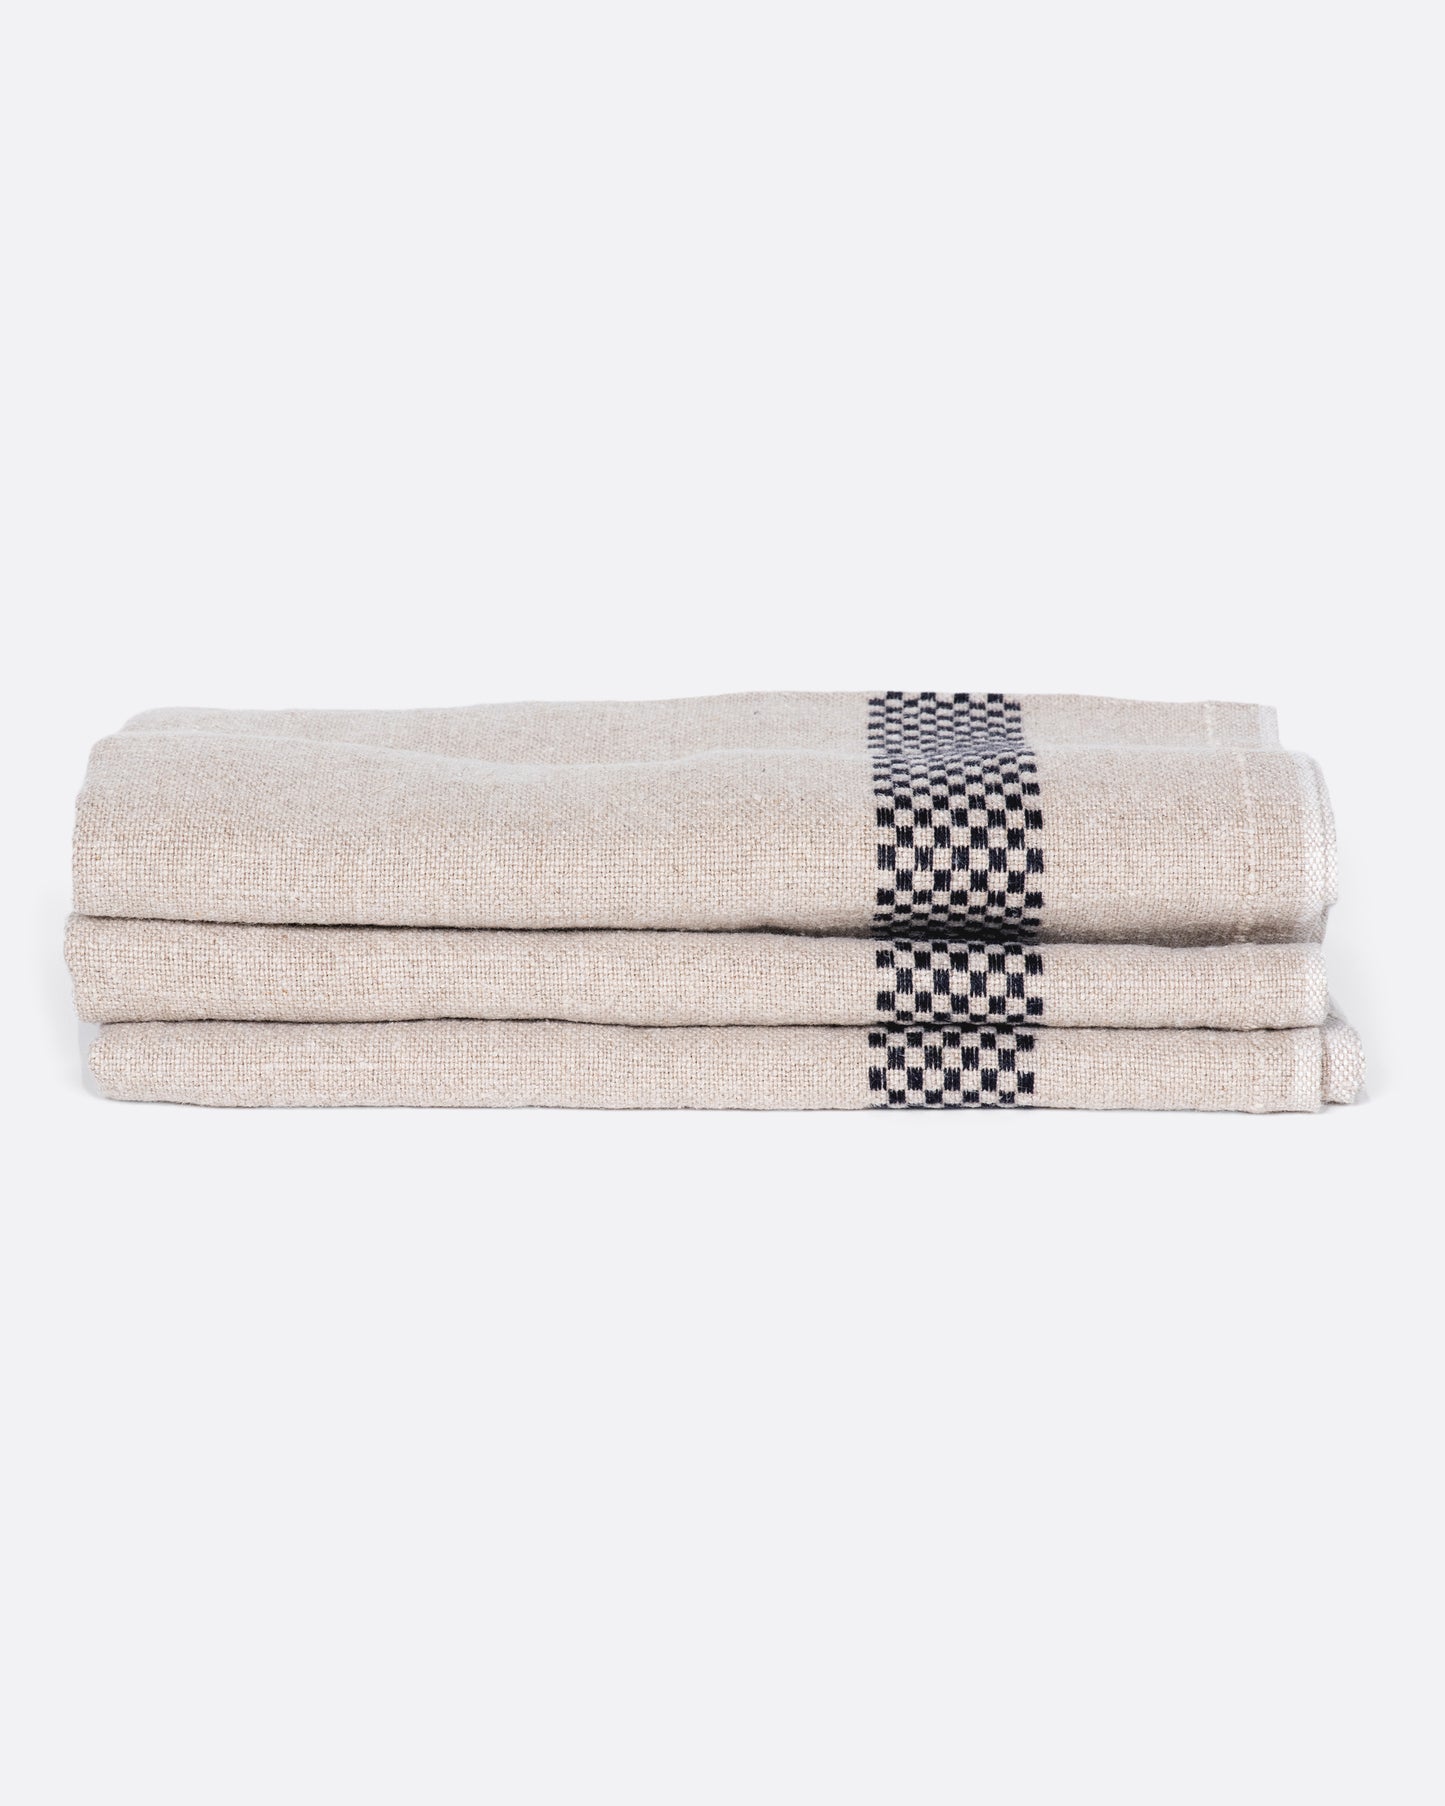 A stack of three natural linen napkins with black checkered embroidery